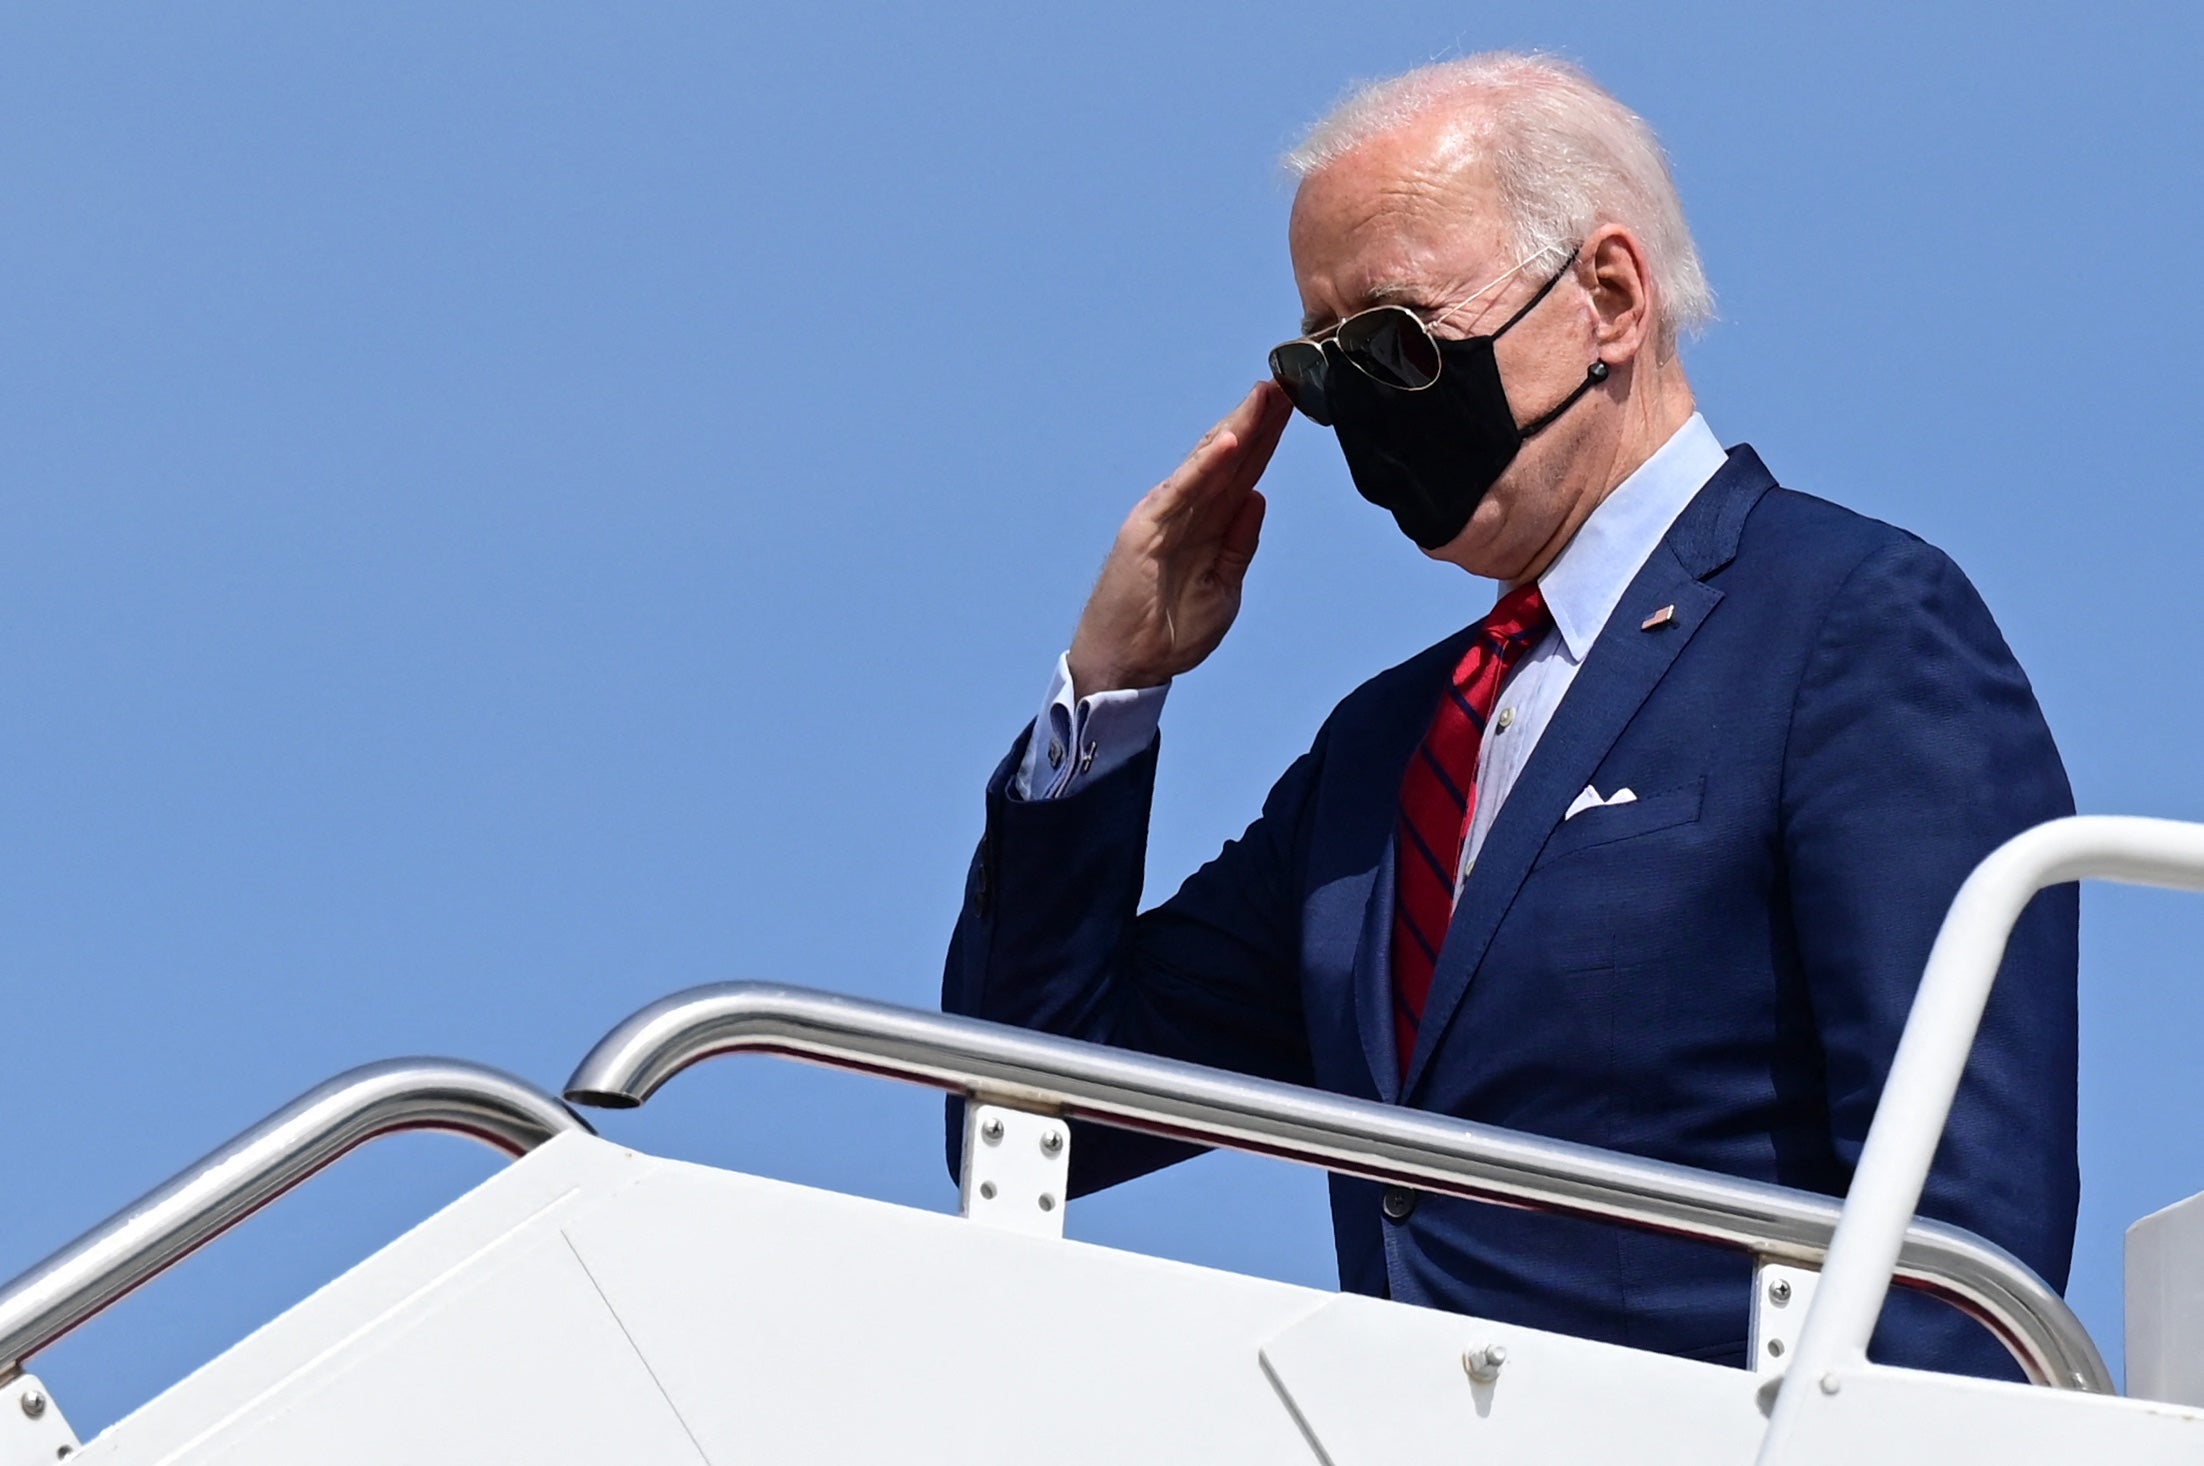 <p>President Joe Biden salutes as he boards Air Force One. The sooner Americans and Britons can take to the air again, the better</p>